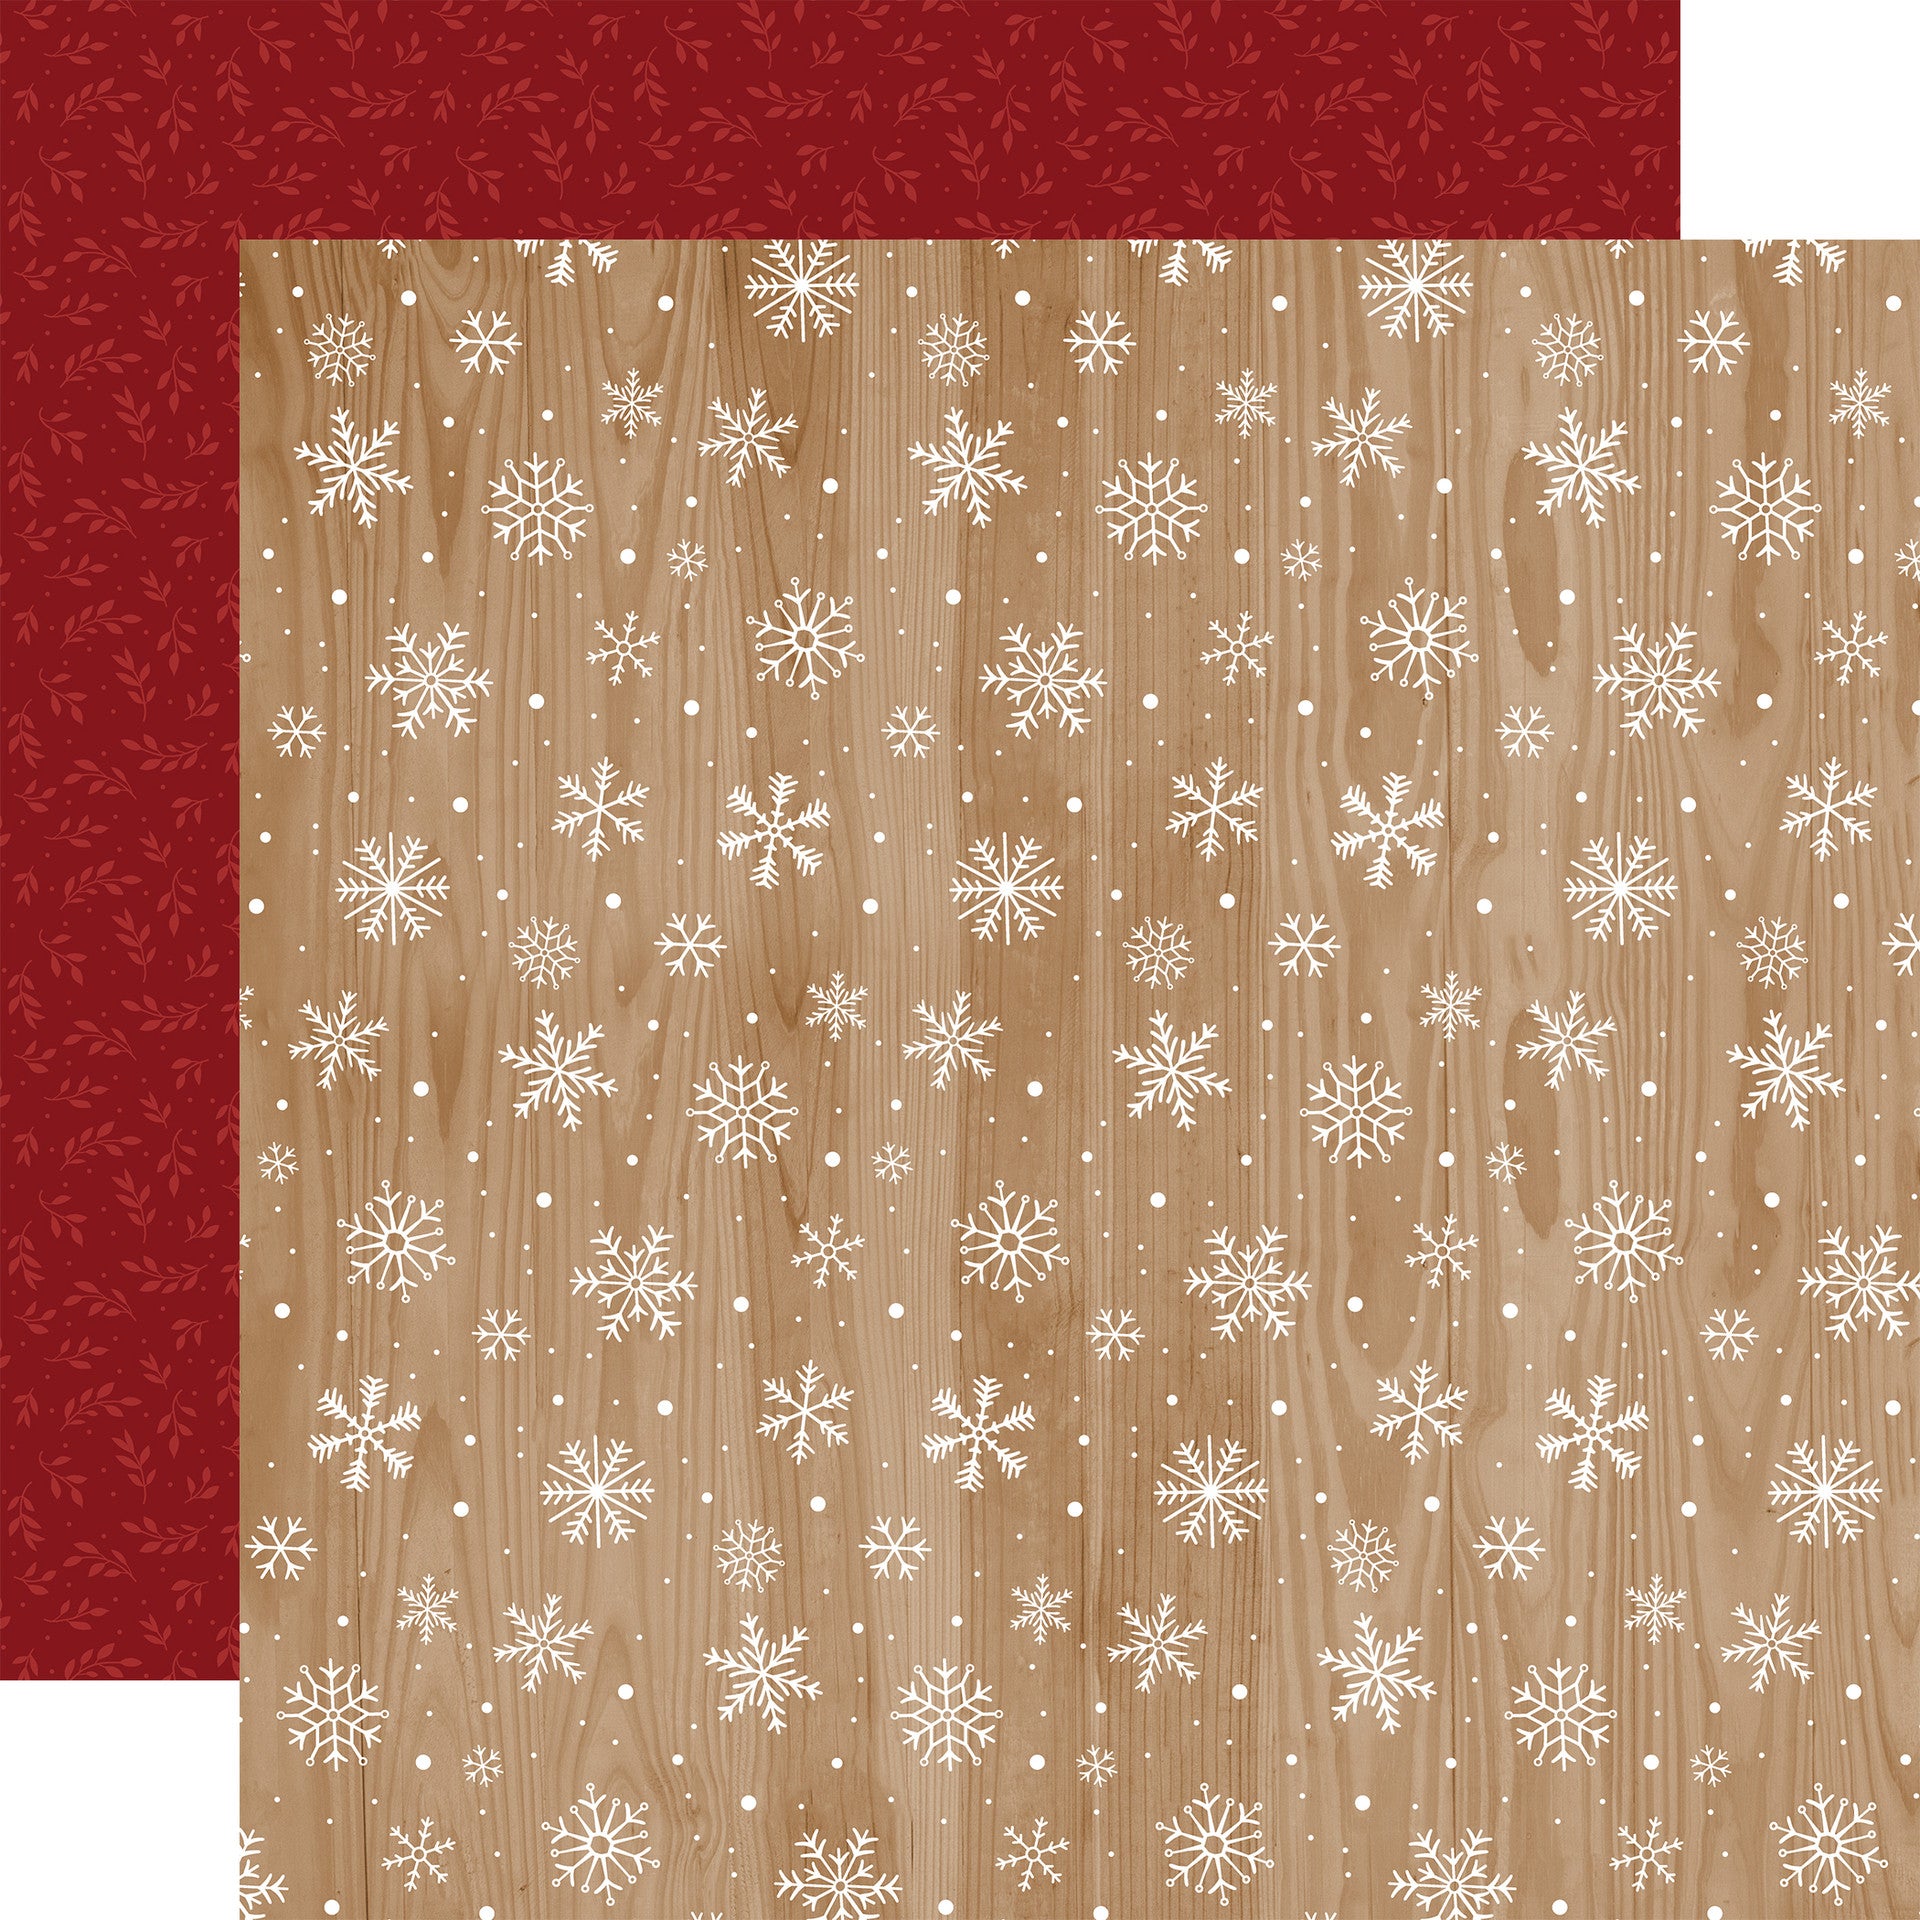 Gnome for Christmas - Woodgrain Snowflakes 12x12 Patterned Paper